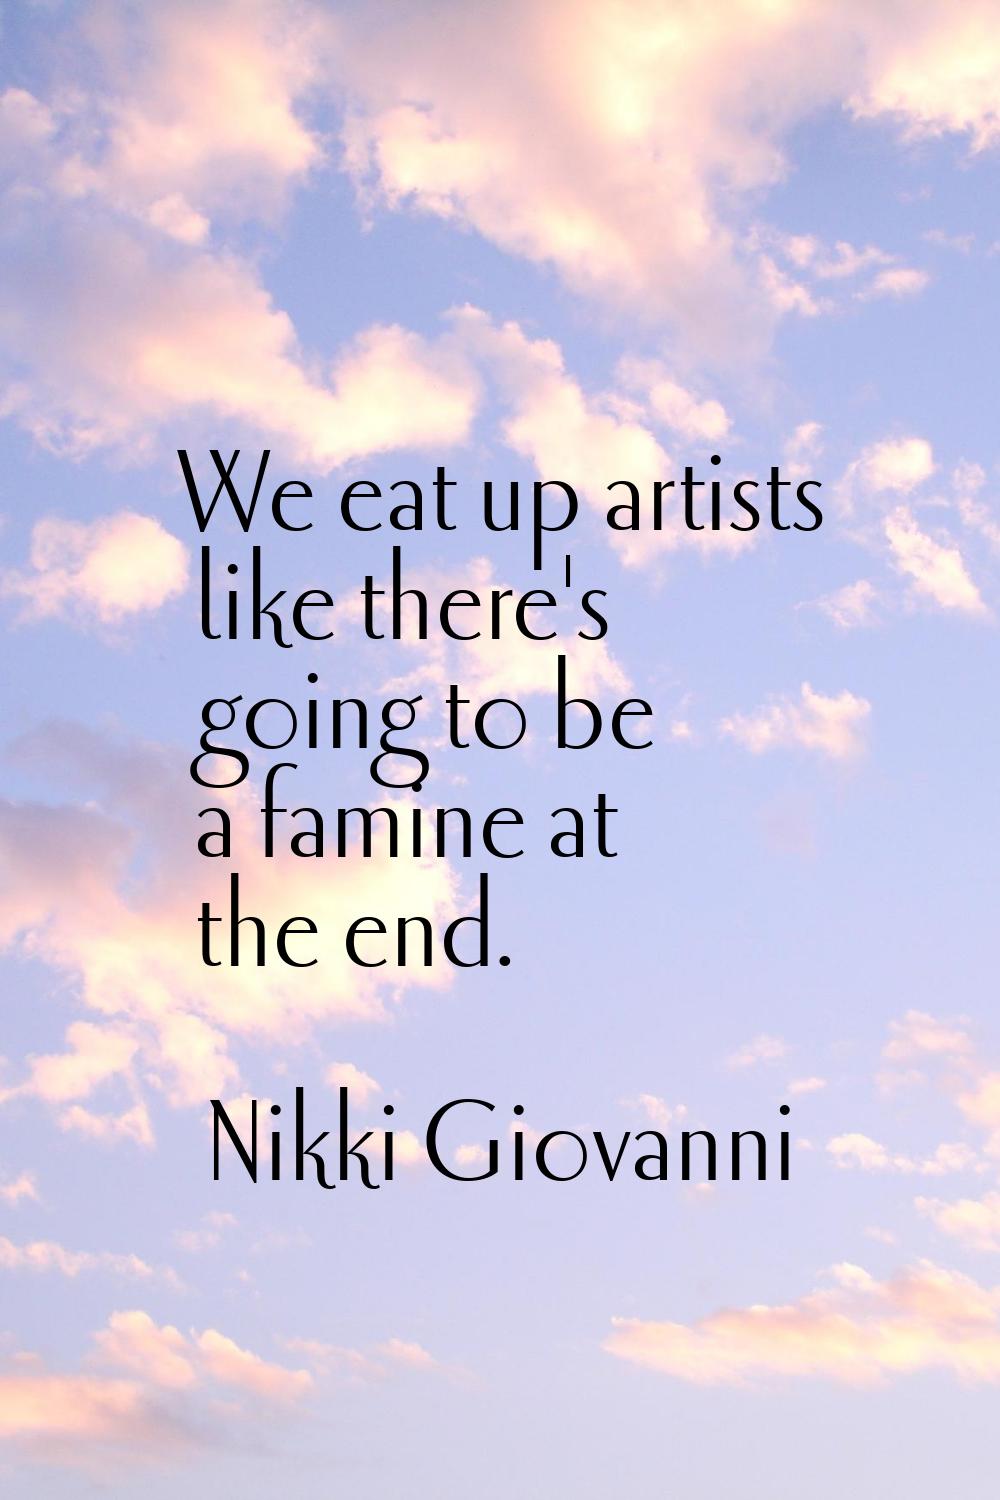 We eat up artists like there's going to be a famine at the end.